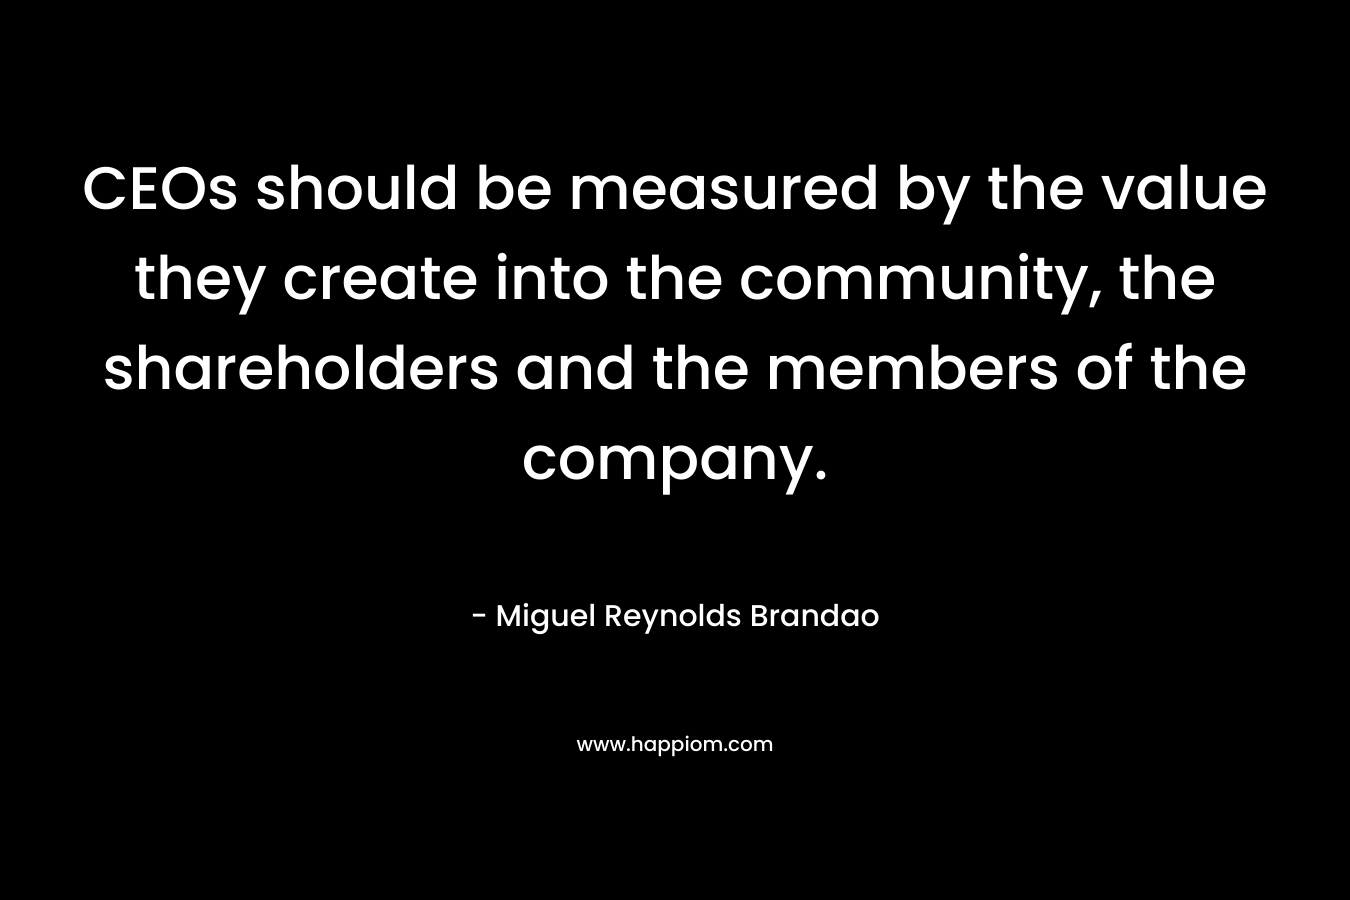 CEOs should be measured by the value they create into the community, the shareholders and the members of the company. – Miguel Reynolds Brandao